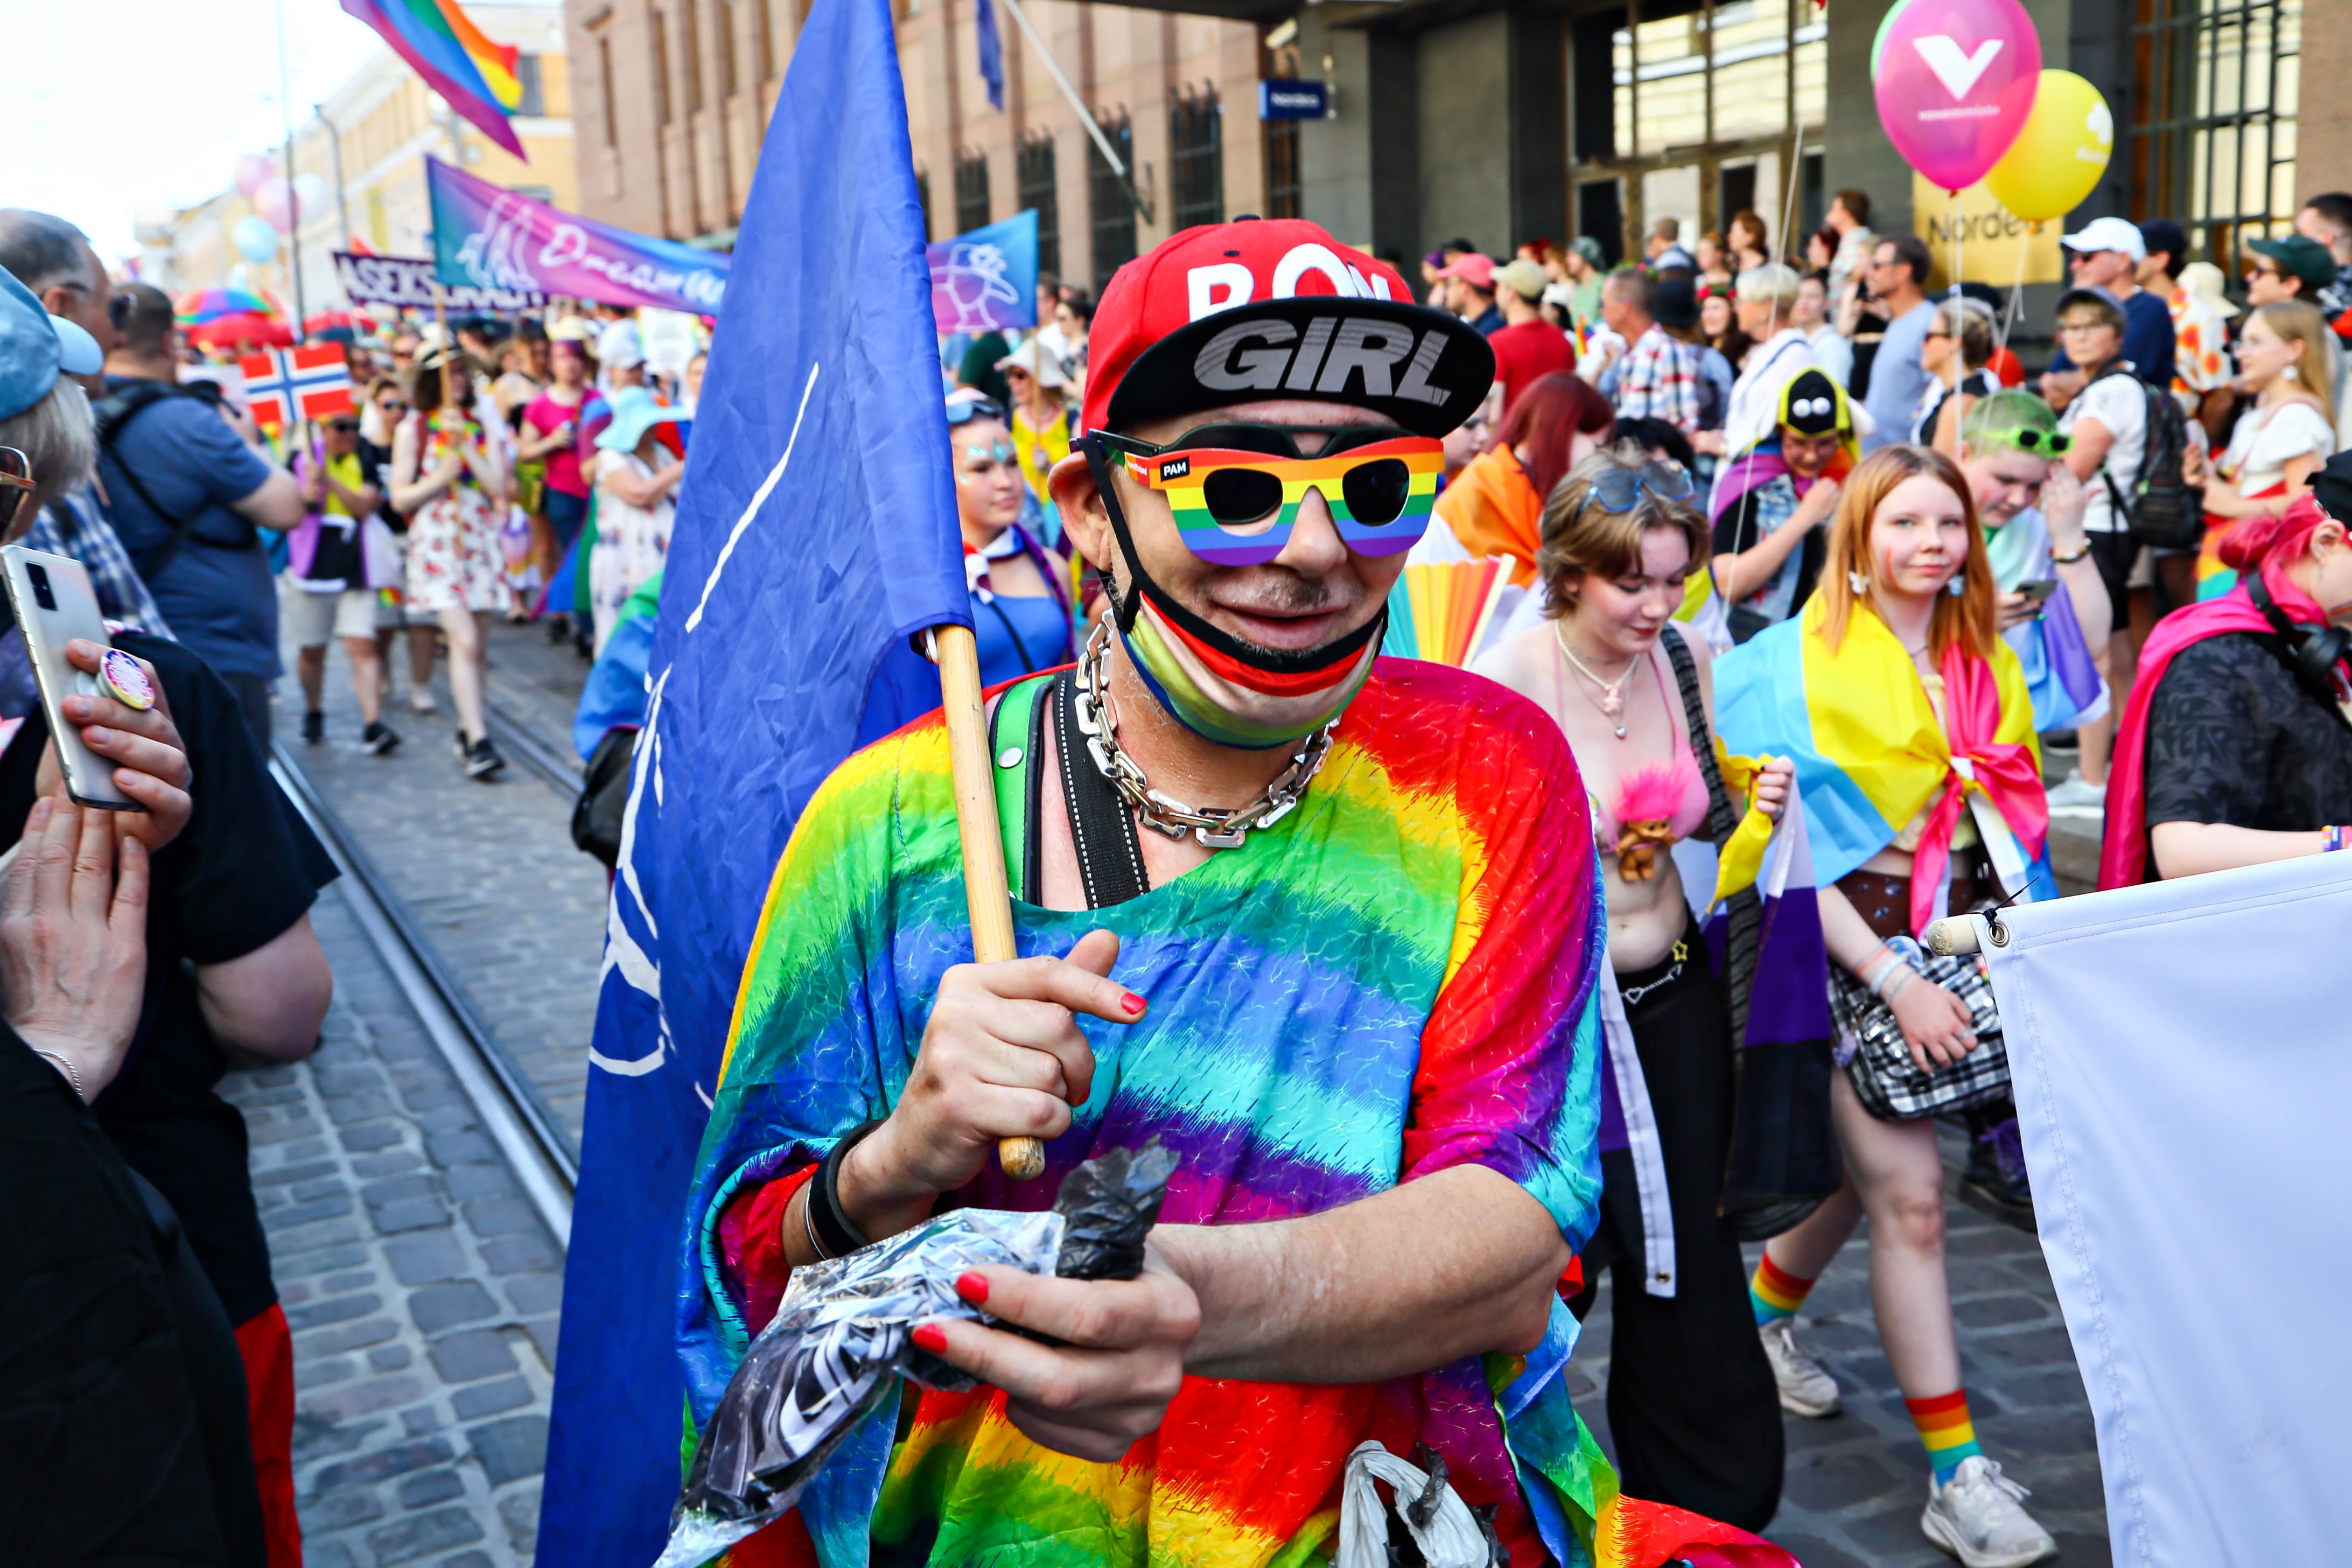 Helsinki Pride is preparing for the parade amid heightened anti-LGBTQ+ tensions